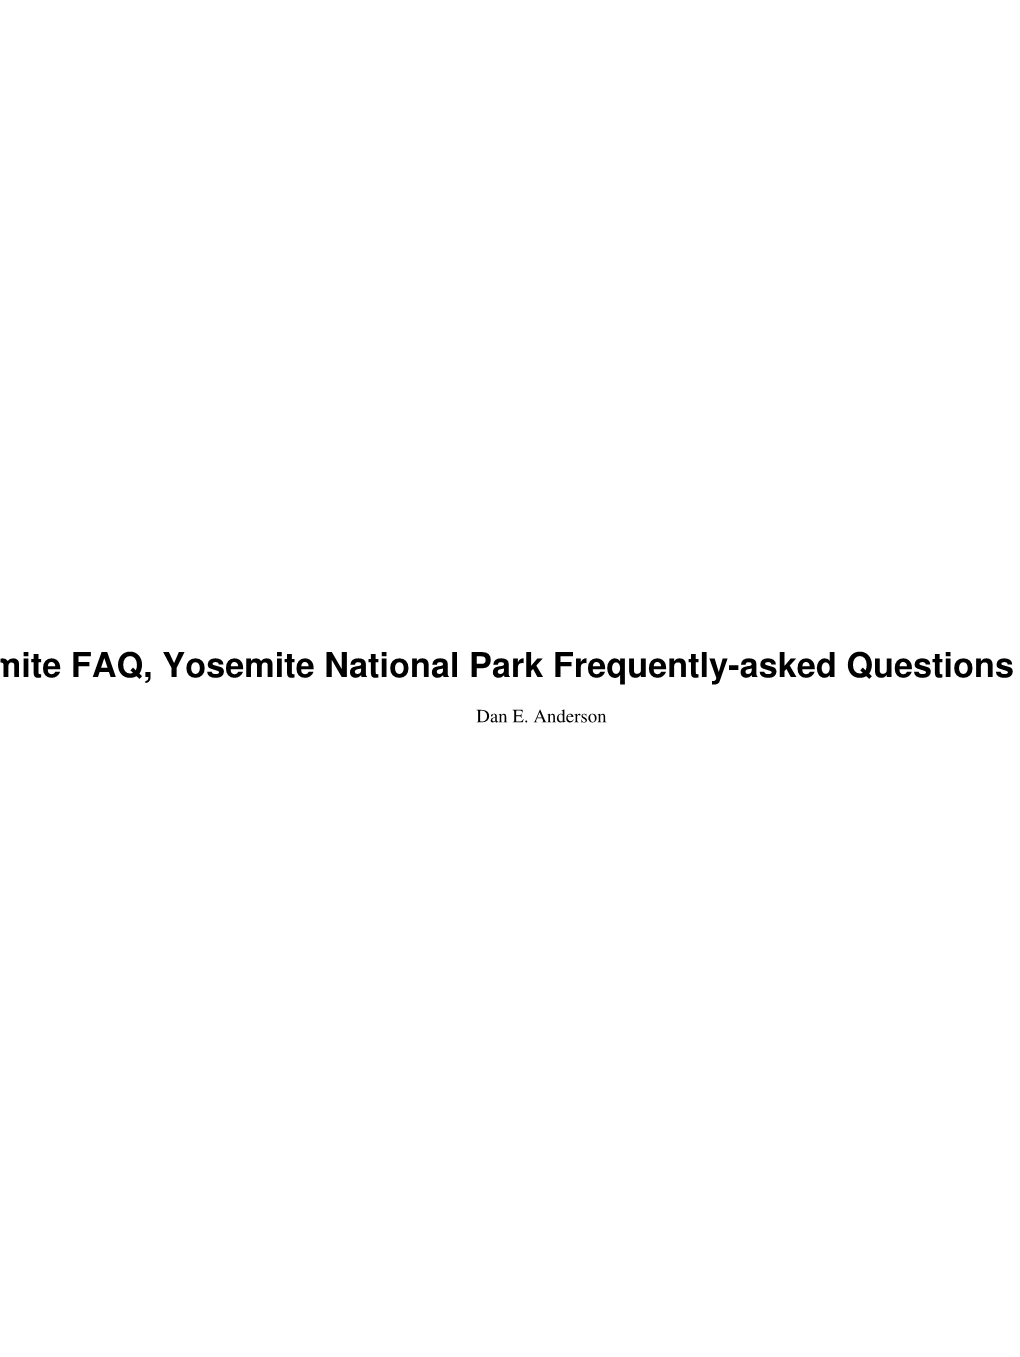 The Yosemite FAQ, Yosemite National Park Frequently-Asked Questions with Answers